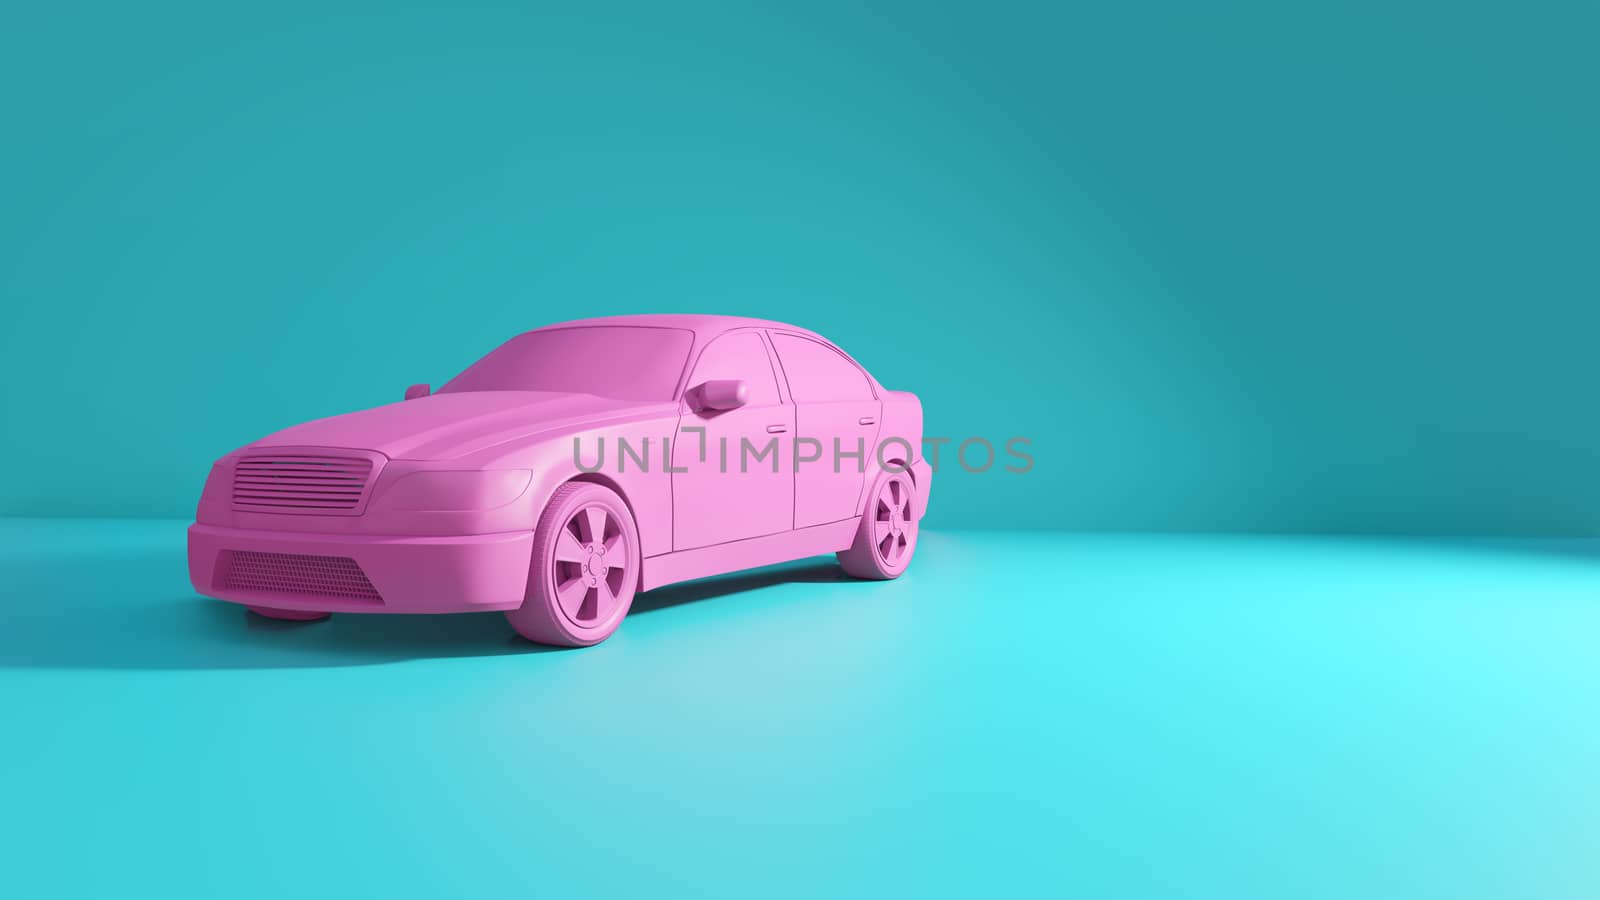 Styled 3D illustration of the pink car by cherezoff